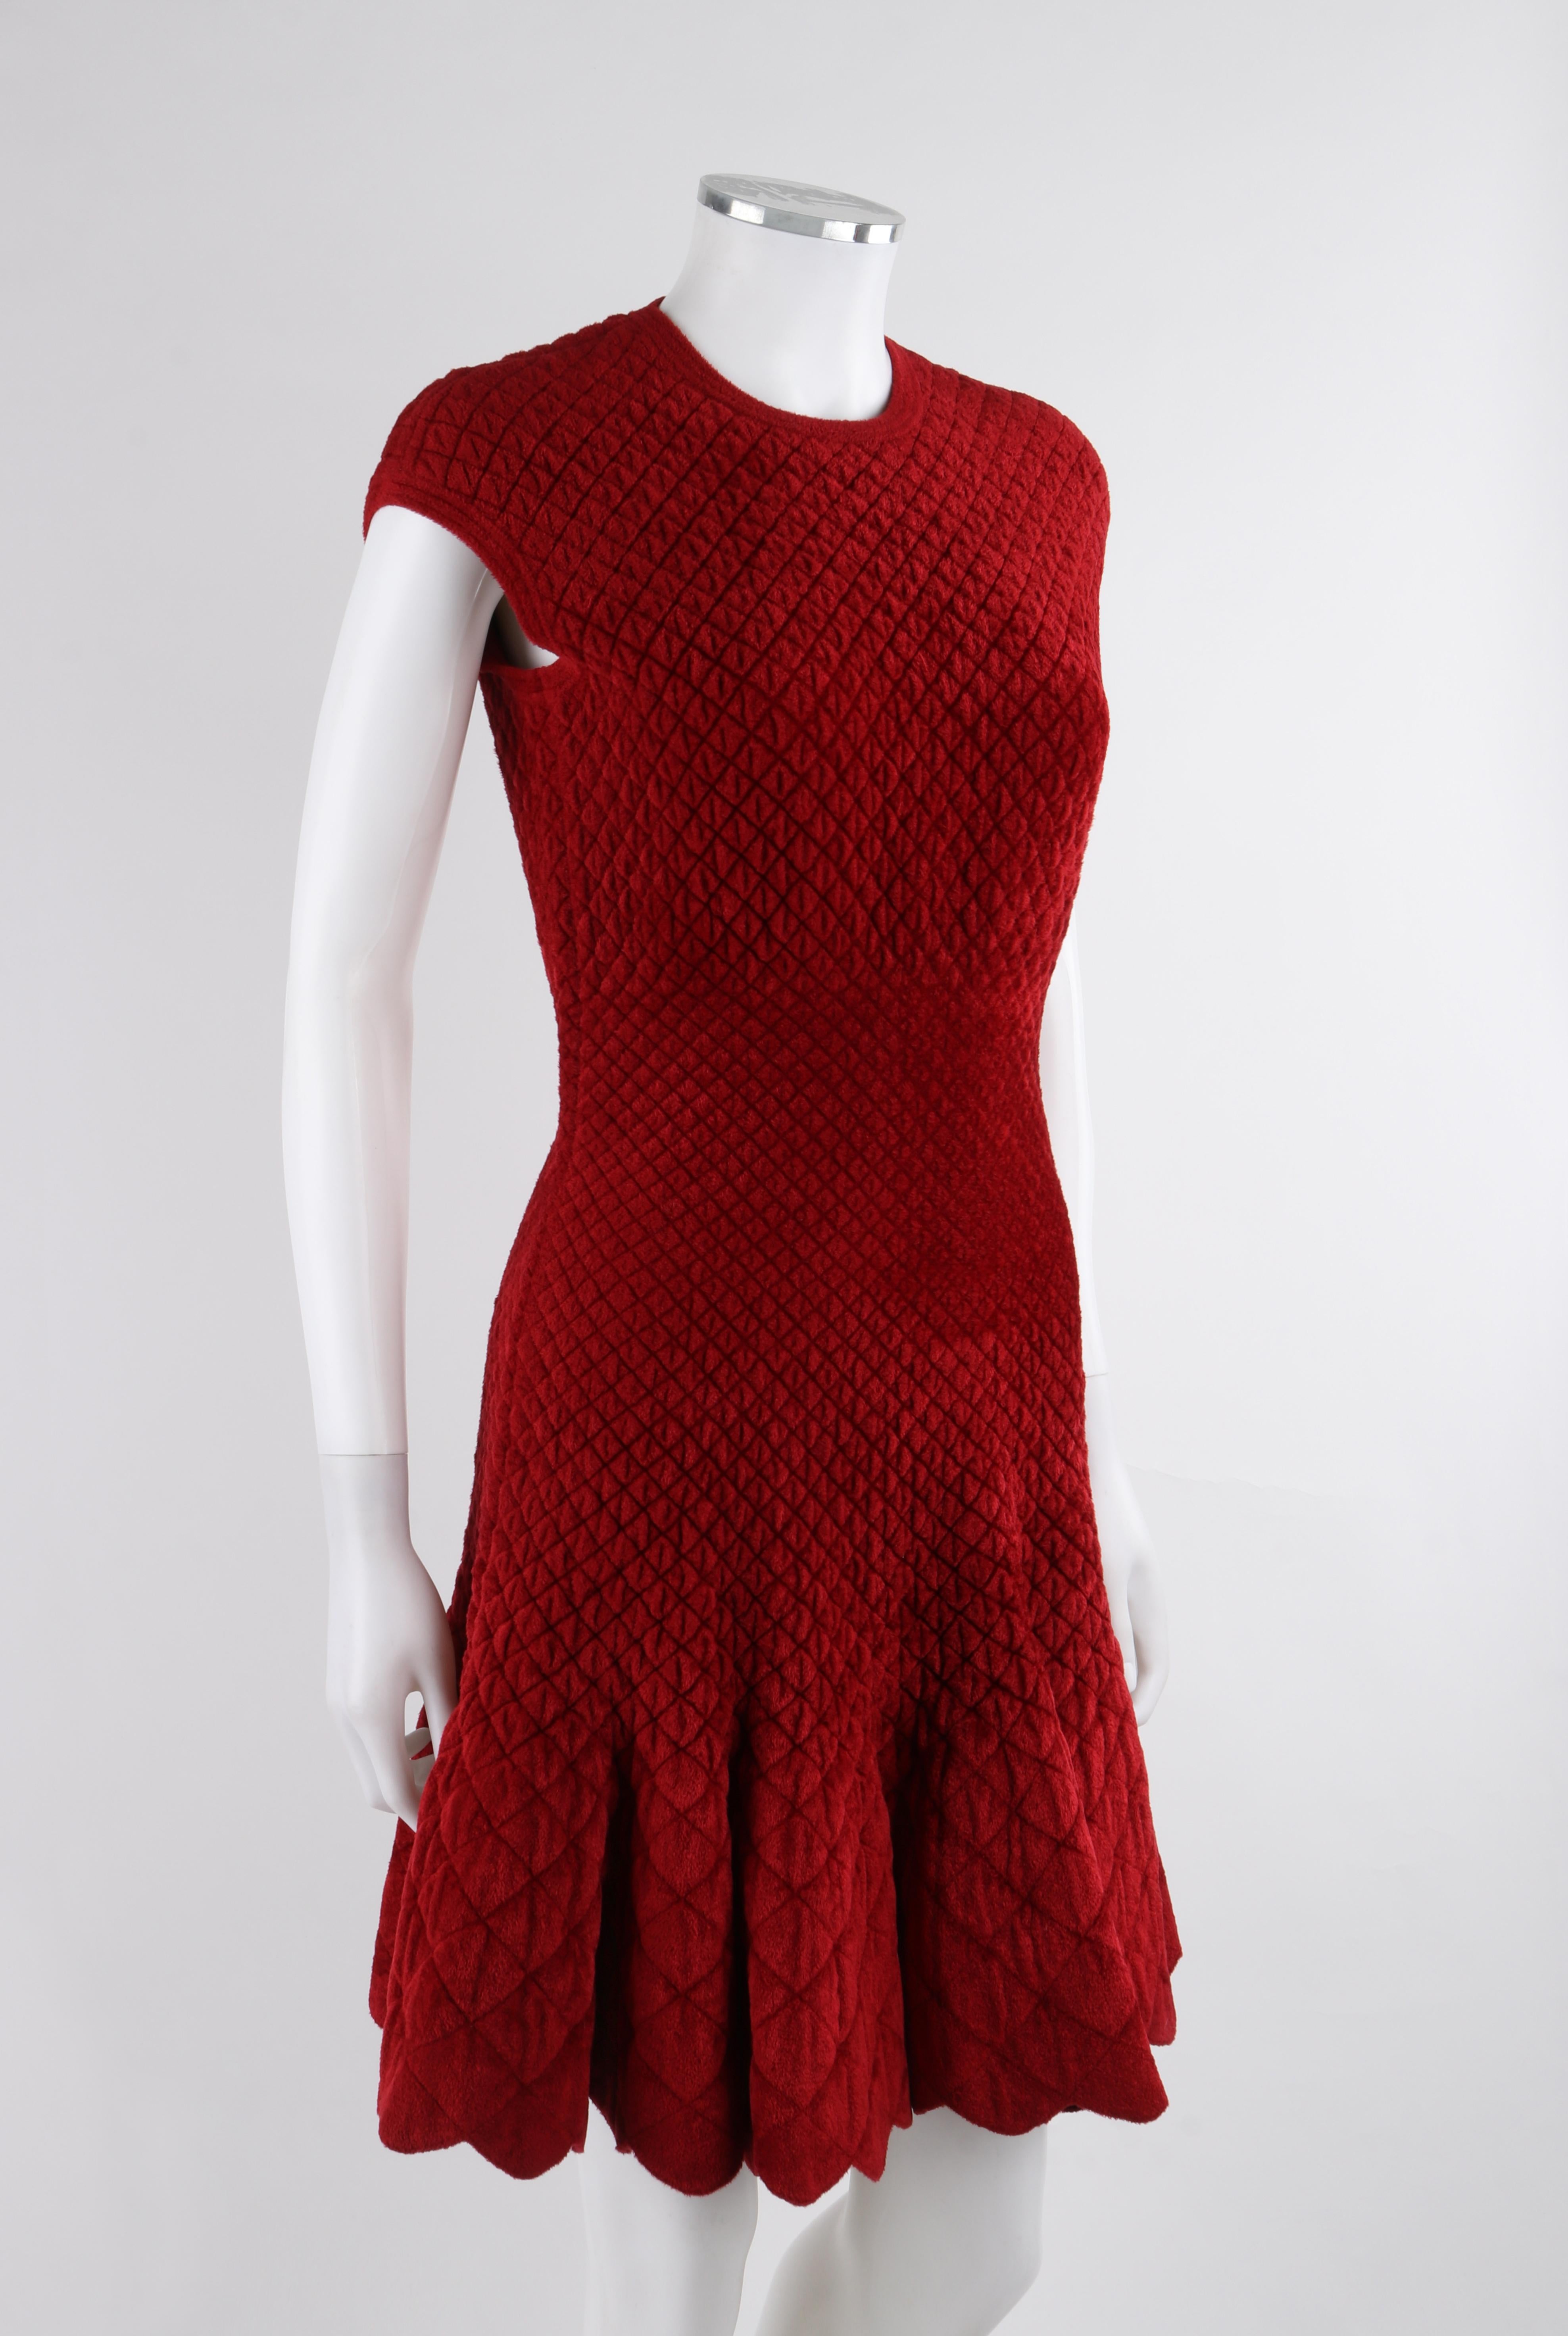 ALEXANDER McQUEEN c.2010's Red Wool Quilted Plush Sleeveless Fit & Flair Dress In Good Condition For Sale In Thiensville, WI